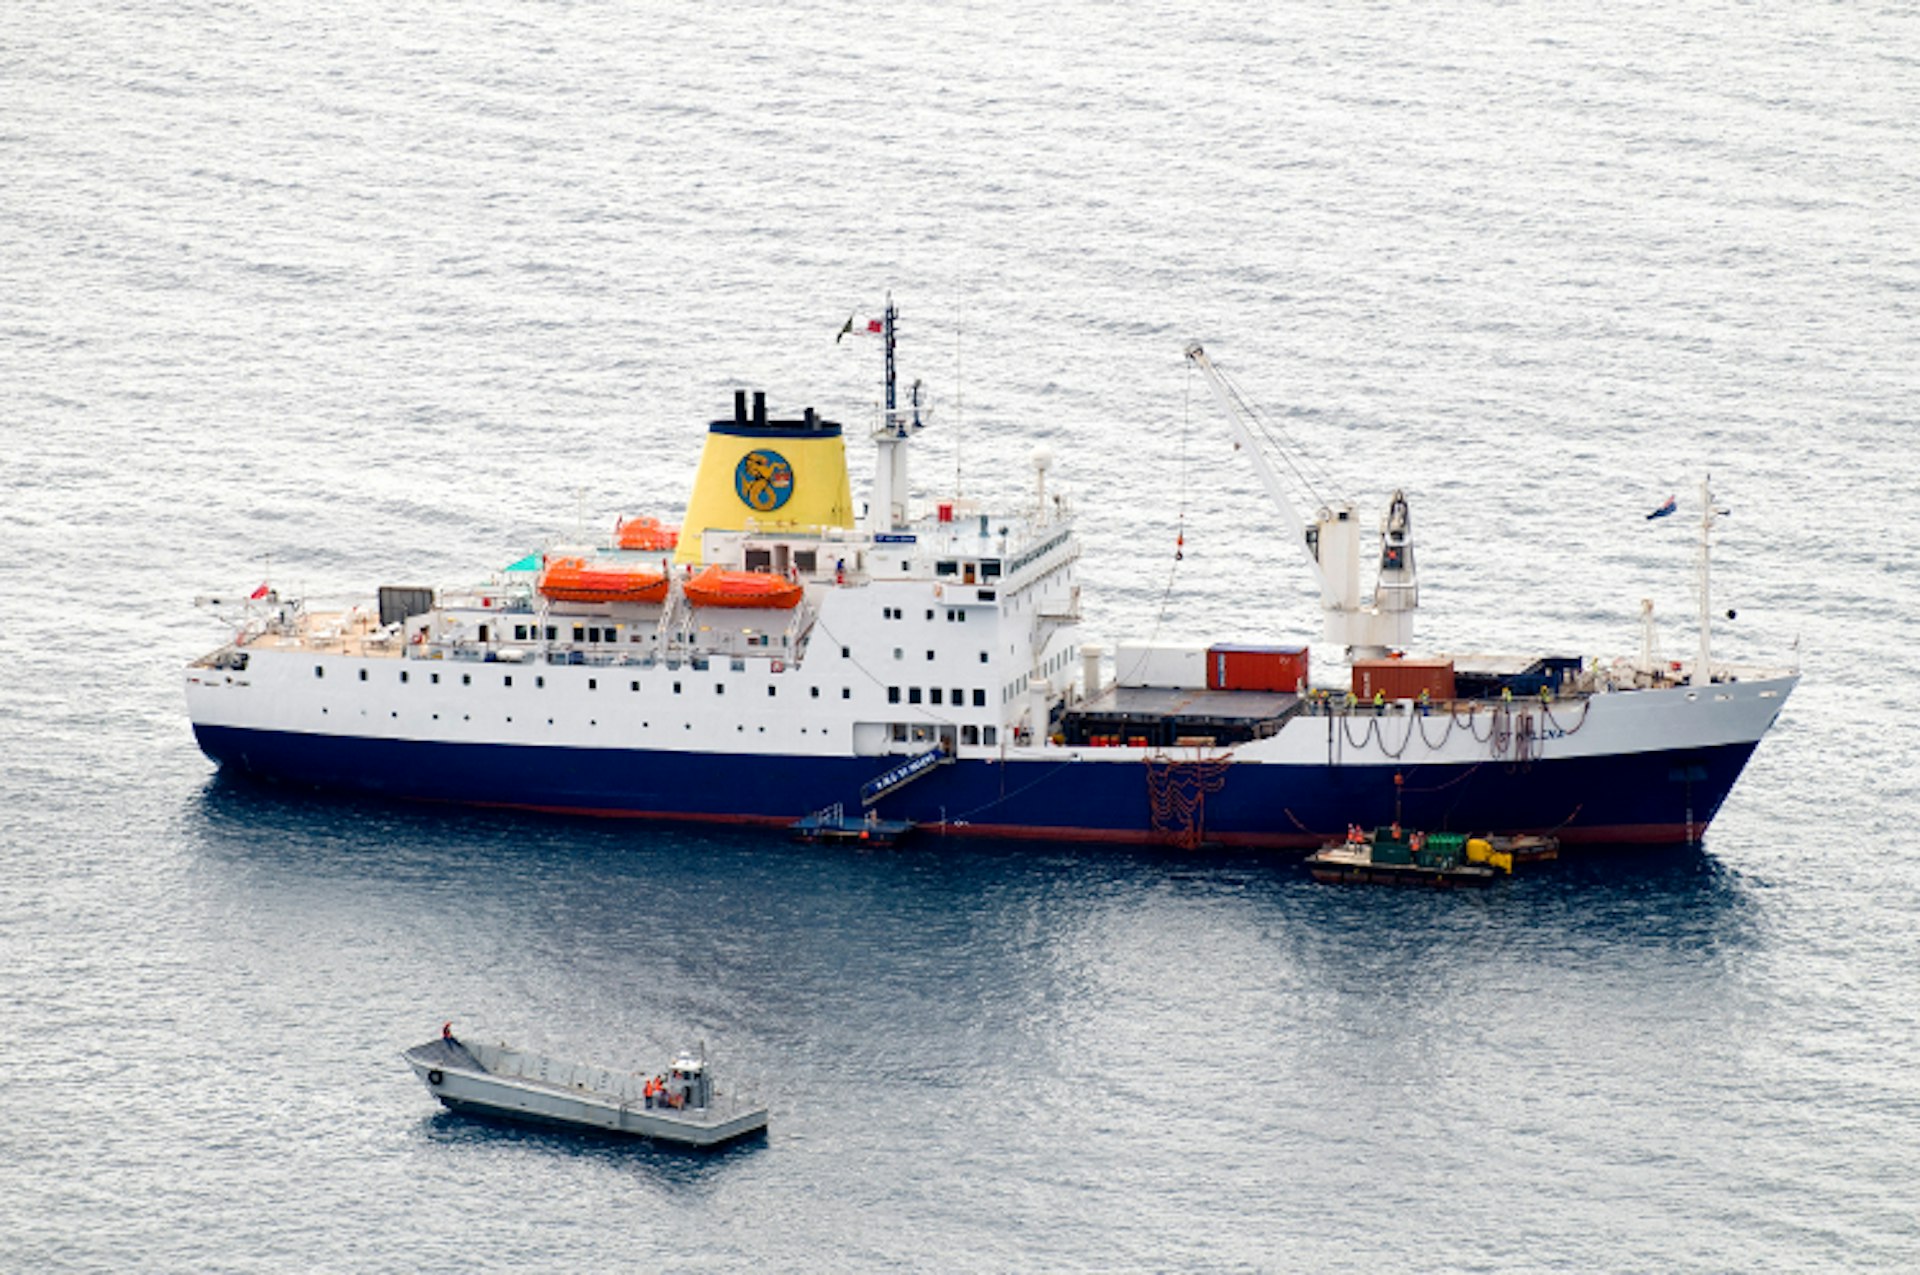 The Royal Mail Ship St Helena. Image by Justin Fox / Courtesy of St Helena Tourism